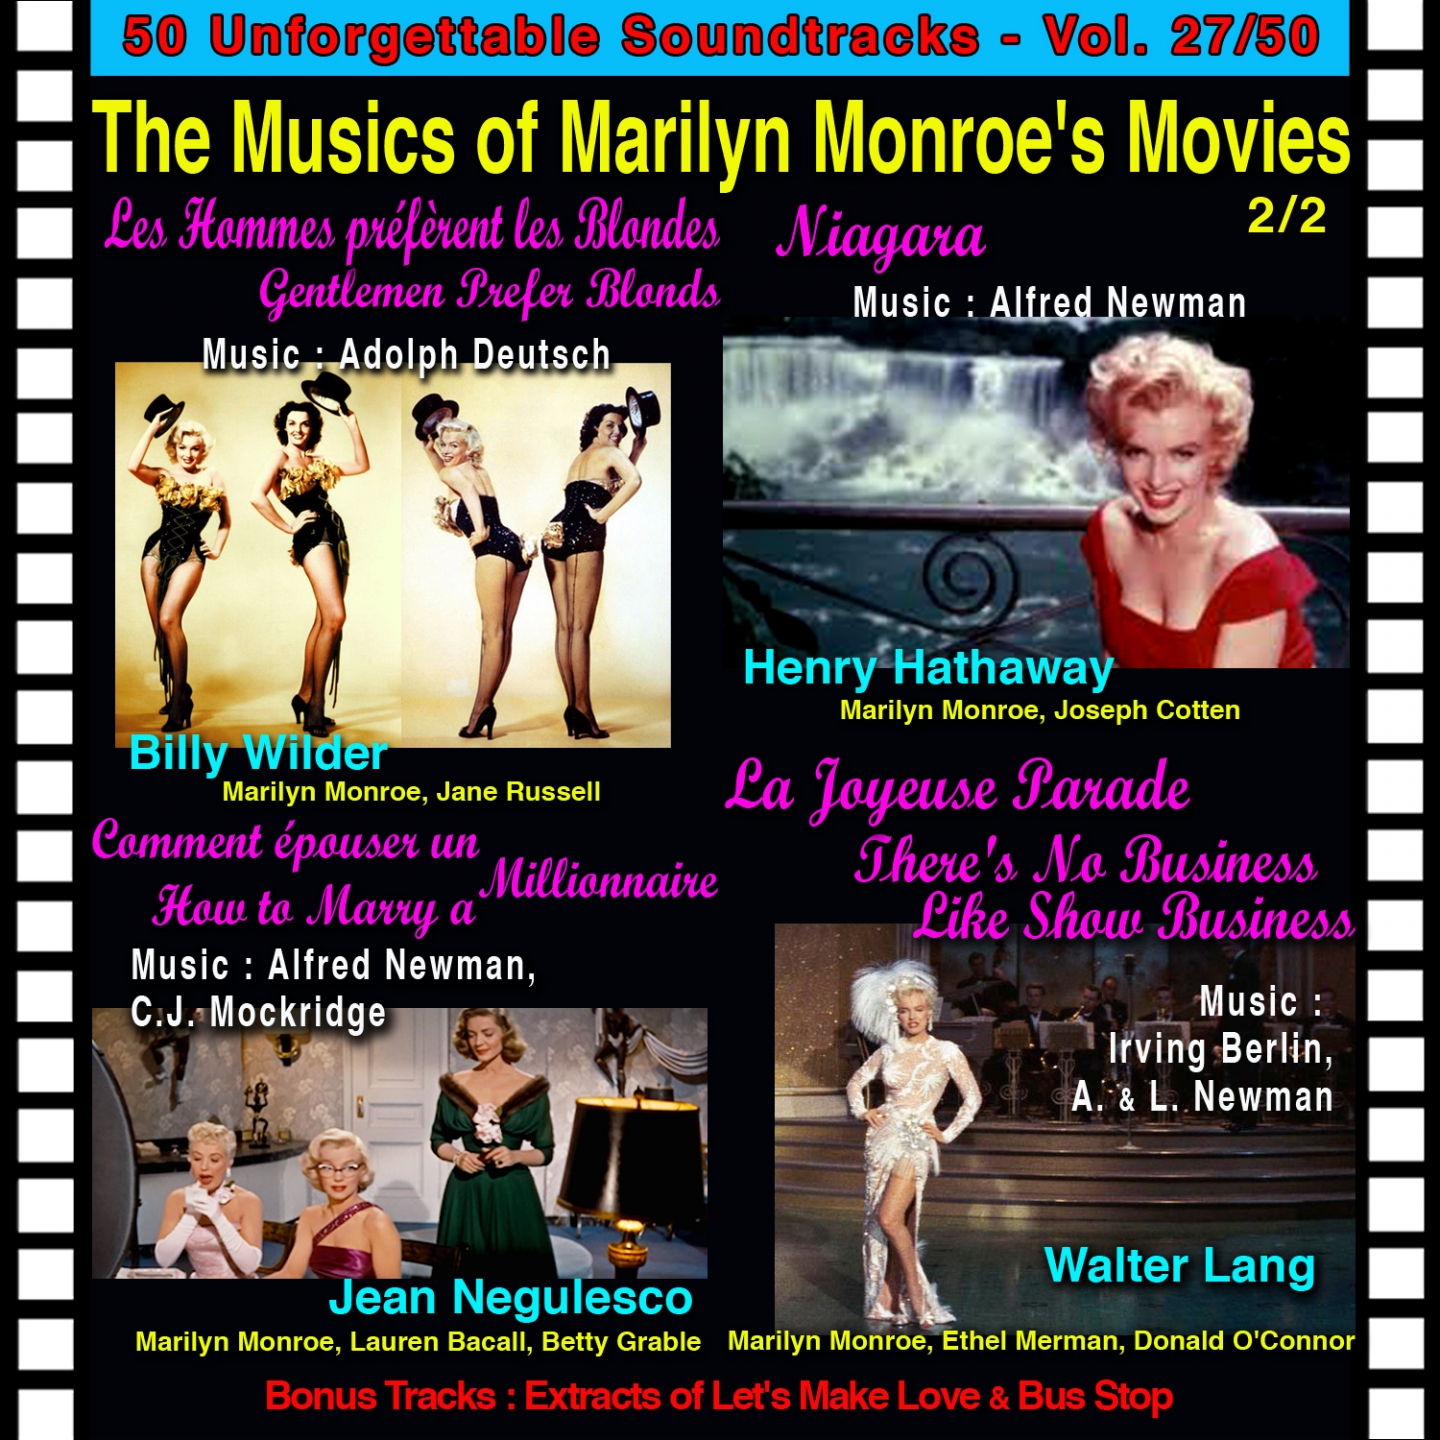 La Joyeuse Parade / There's No Business Like Show Business: After You Get What You Want (Marilyn Music Movies (2 / 2))